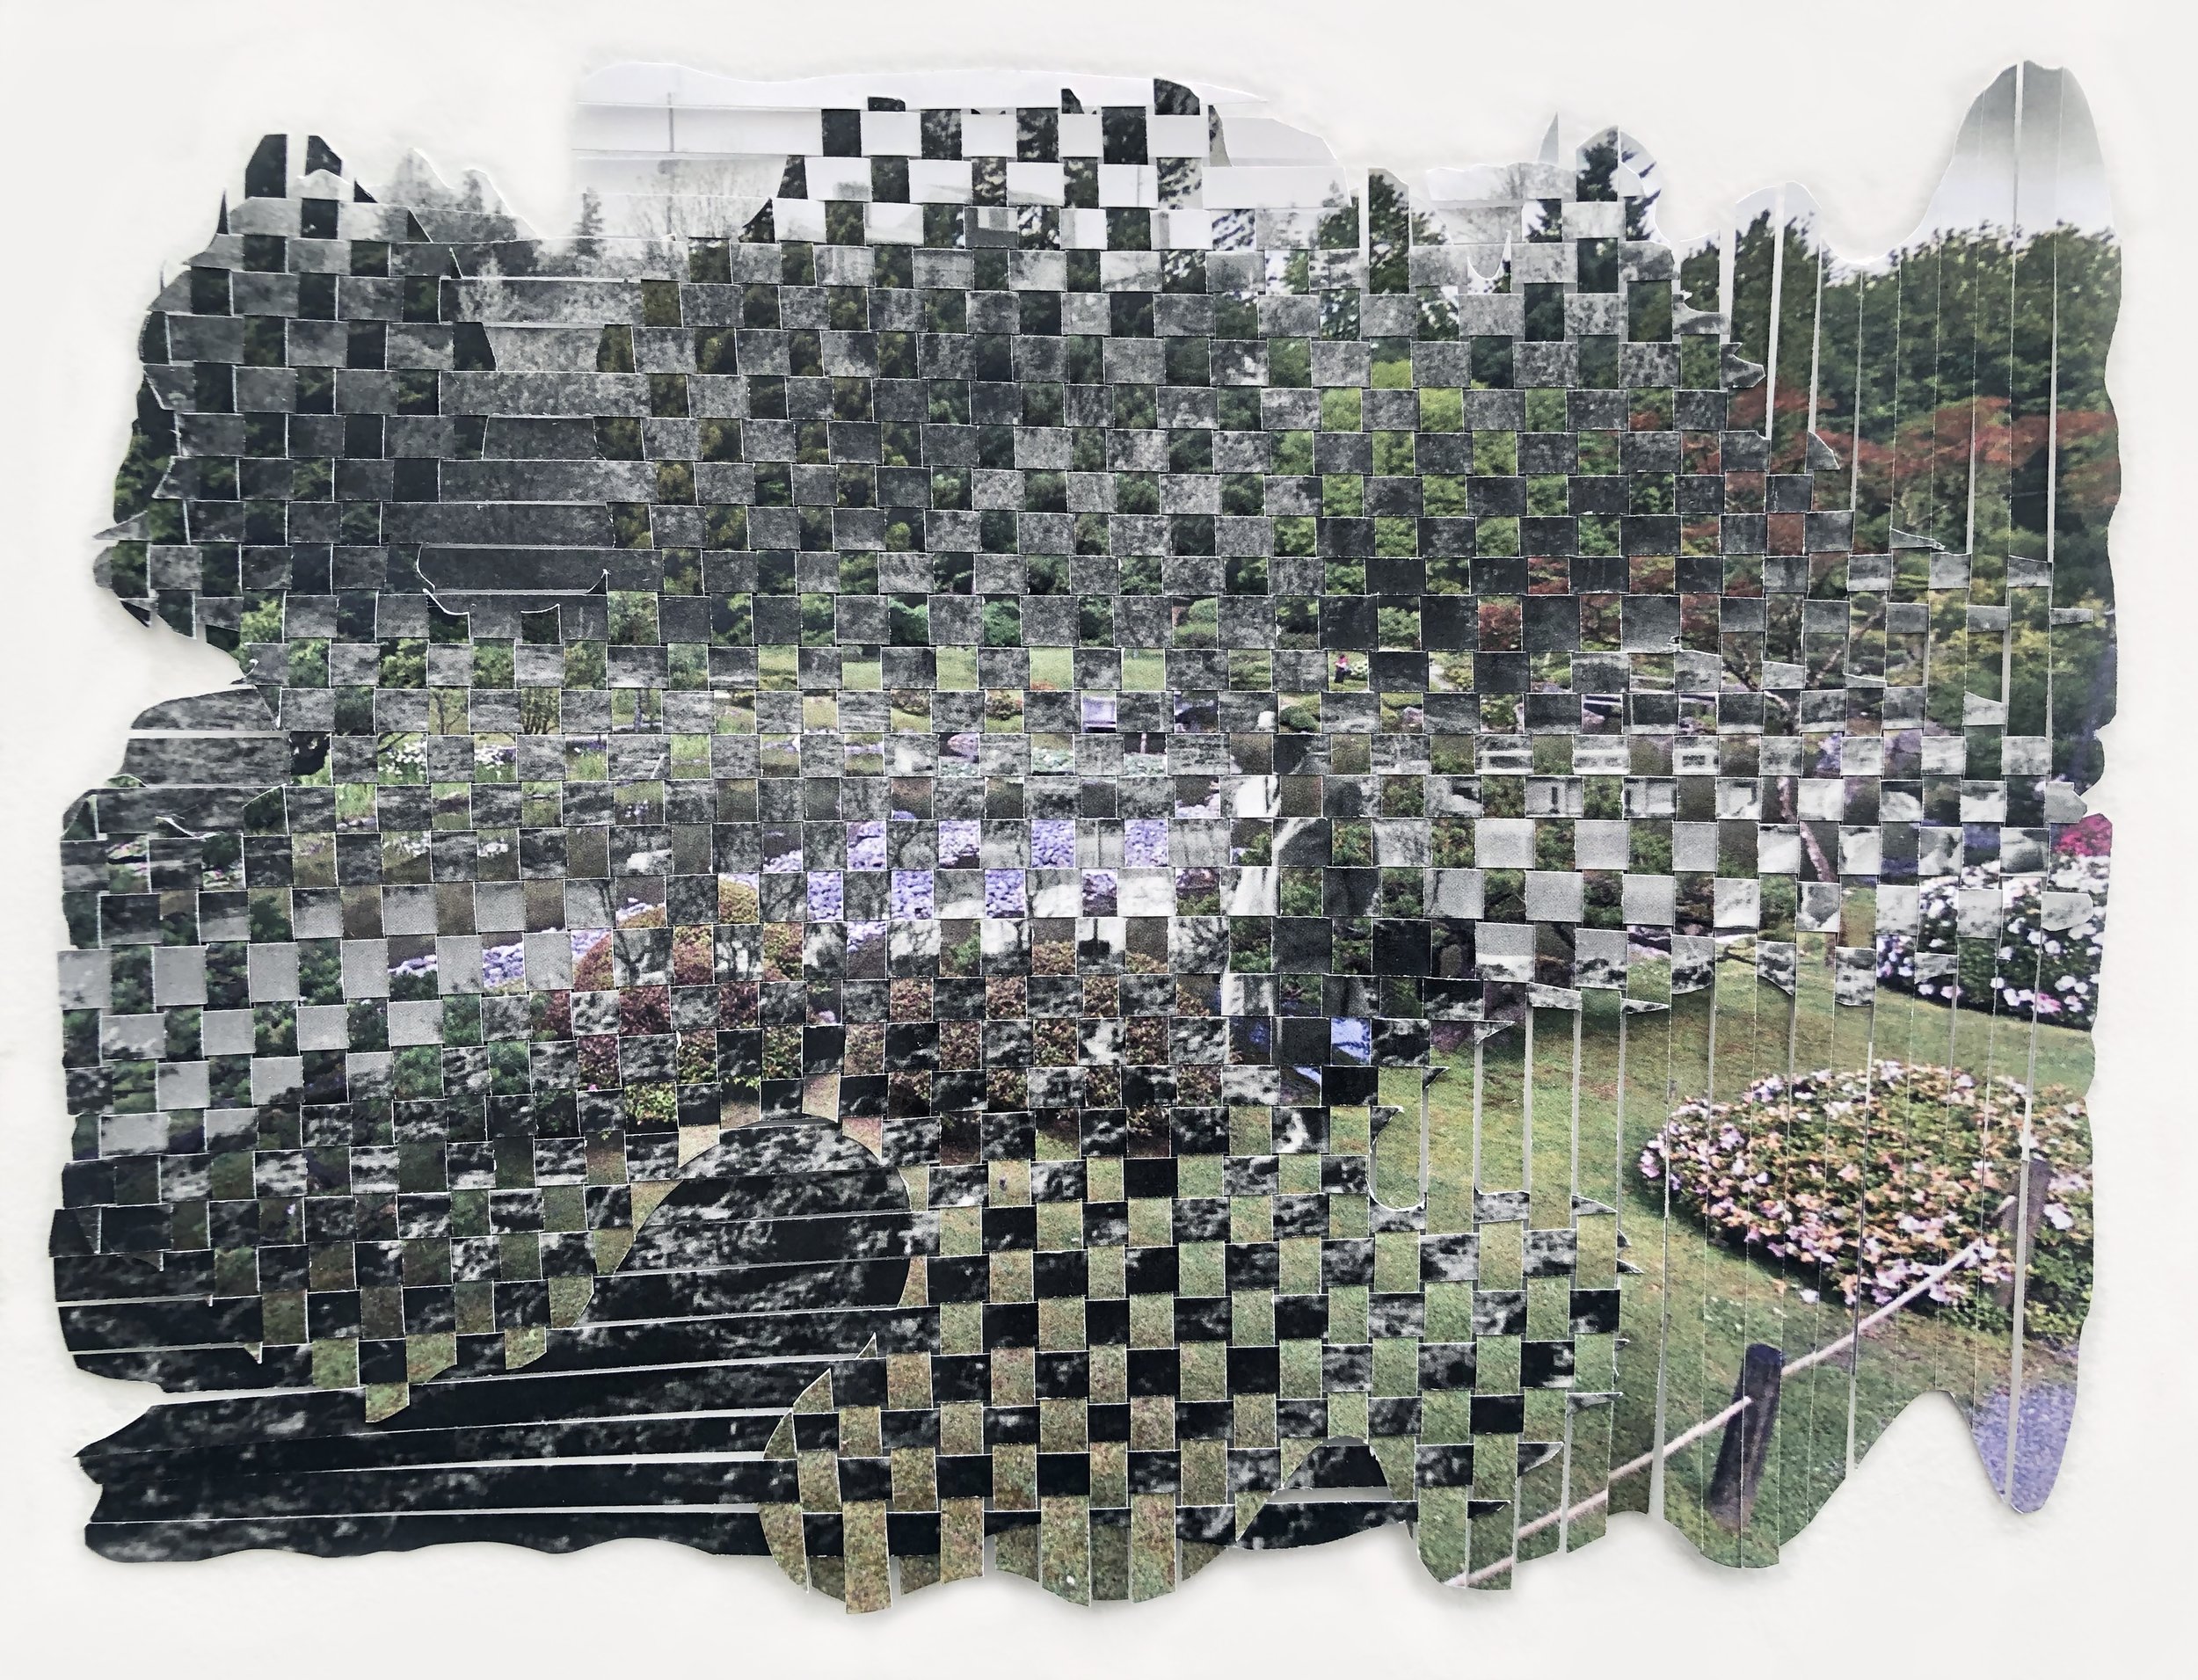  Memories of Present (Dual Past)   2020   prints on paper, woven   Dimensions variable (10.5" x 8.5")    